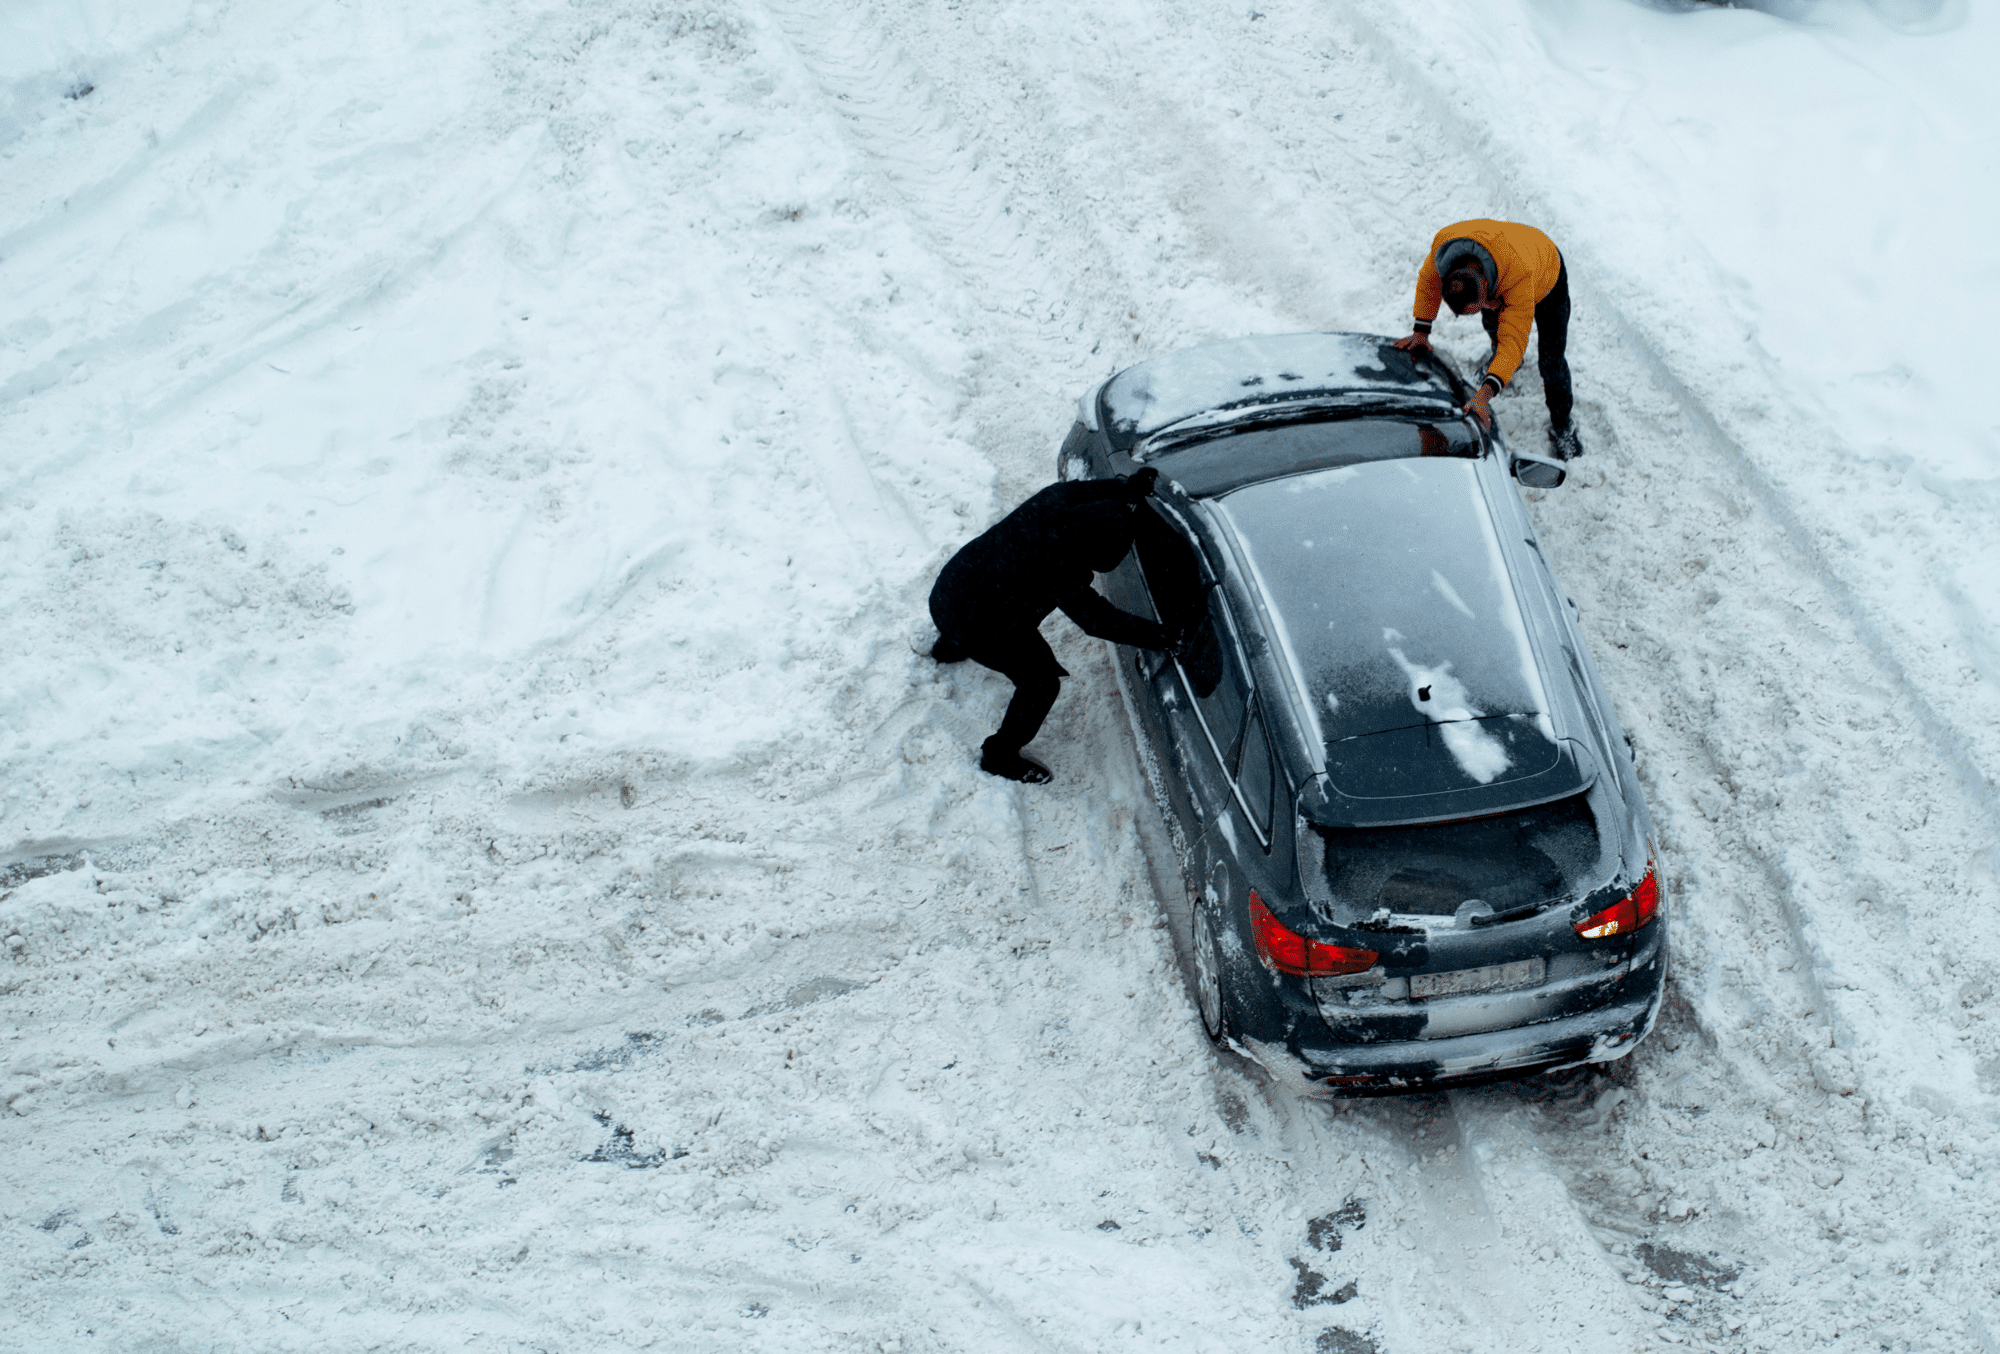 Car stuck in snowy roadway. Two people pushing car.